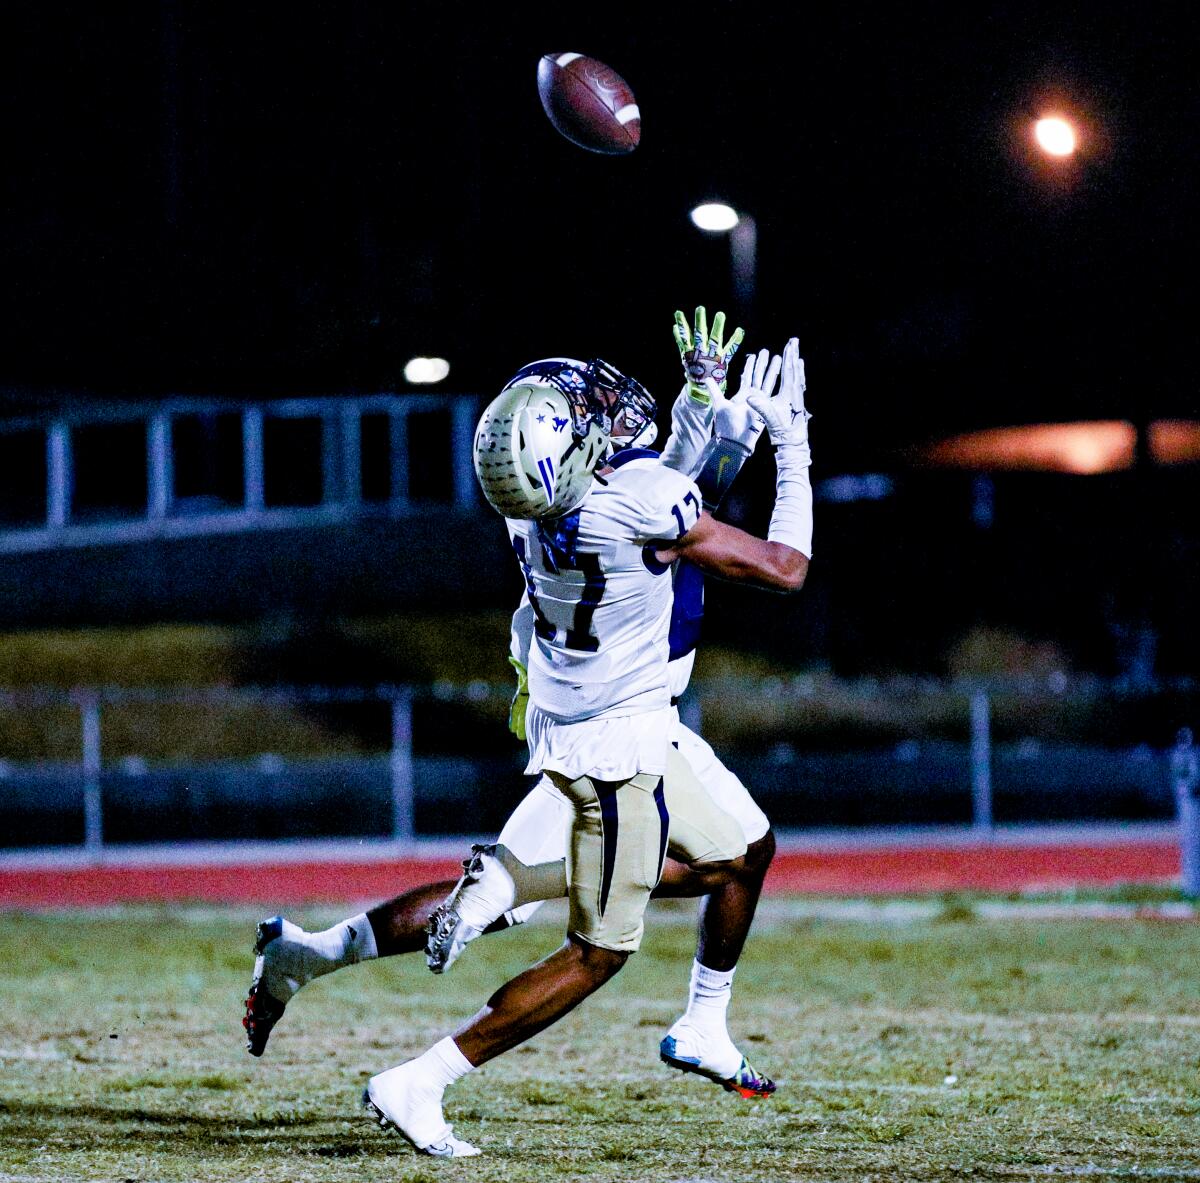 Peyton Waters of Birmingham makes an over-the-shoulder catch for an interception against Venice.